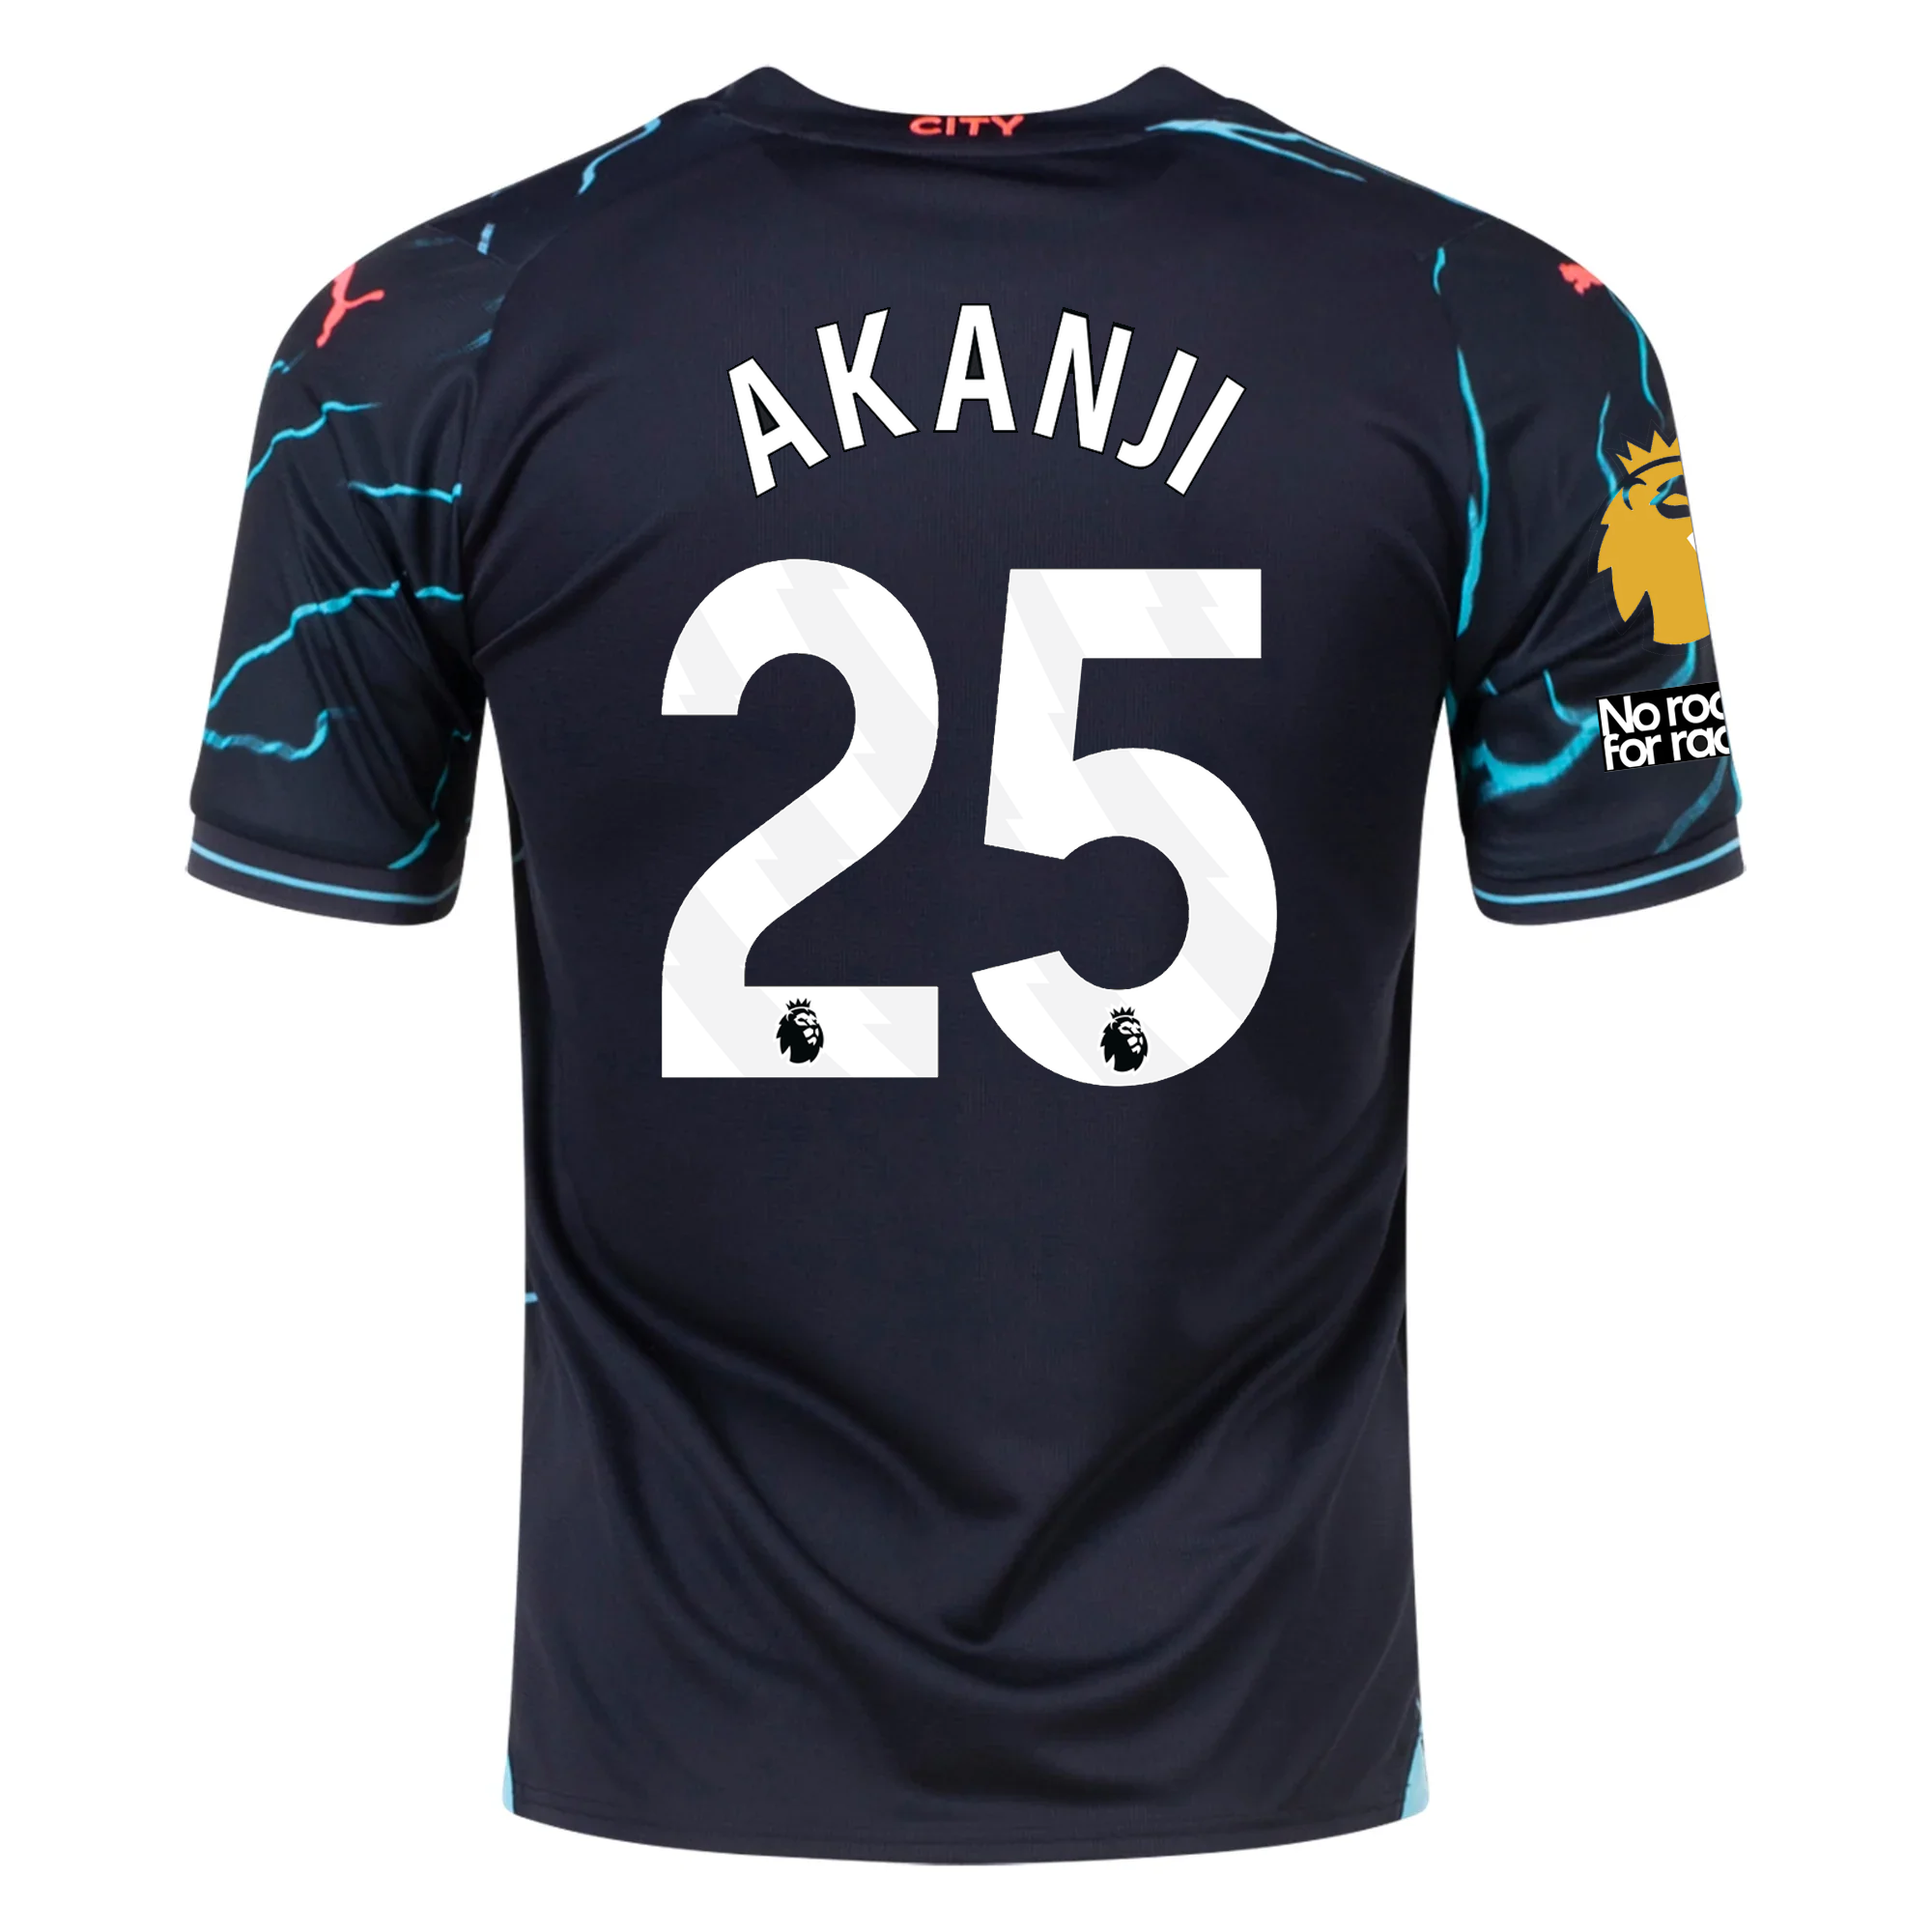 Puma Manchester City Akanji Third Jersey w/ EPL + No Room For Racism + -  Soccer Wearhouse